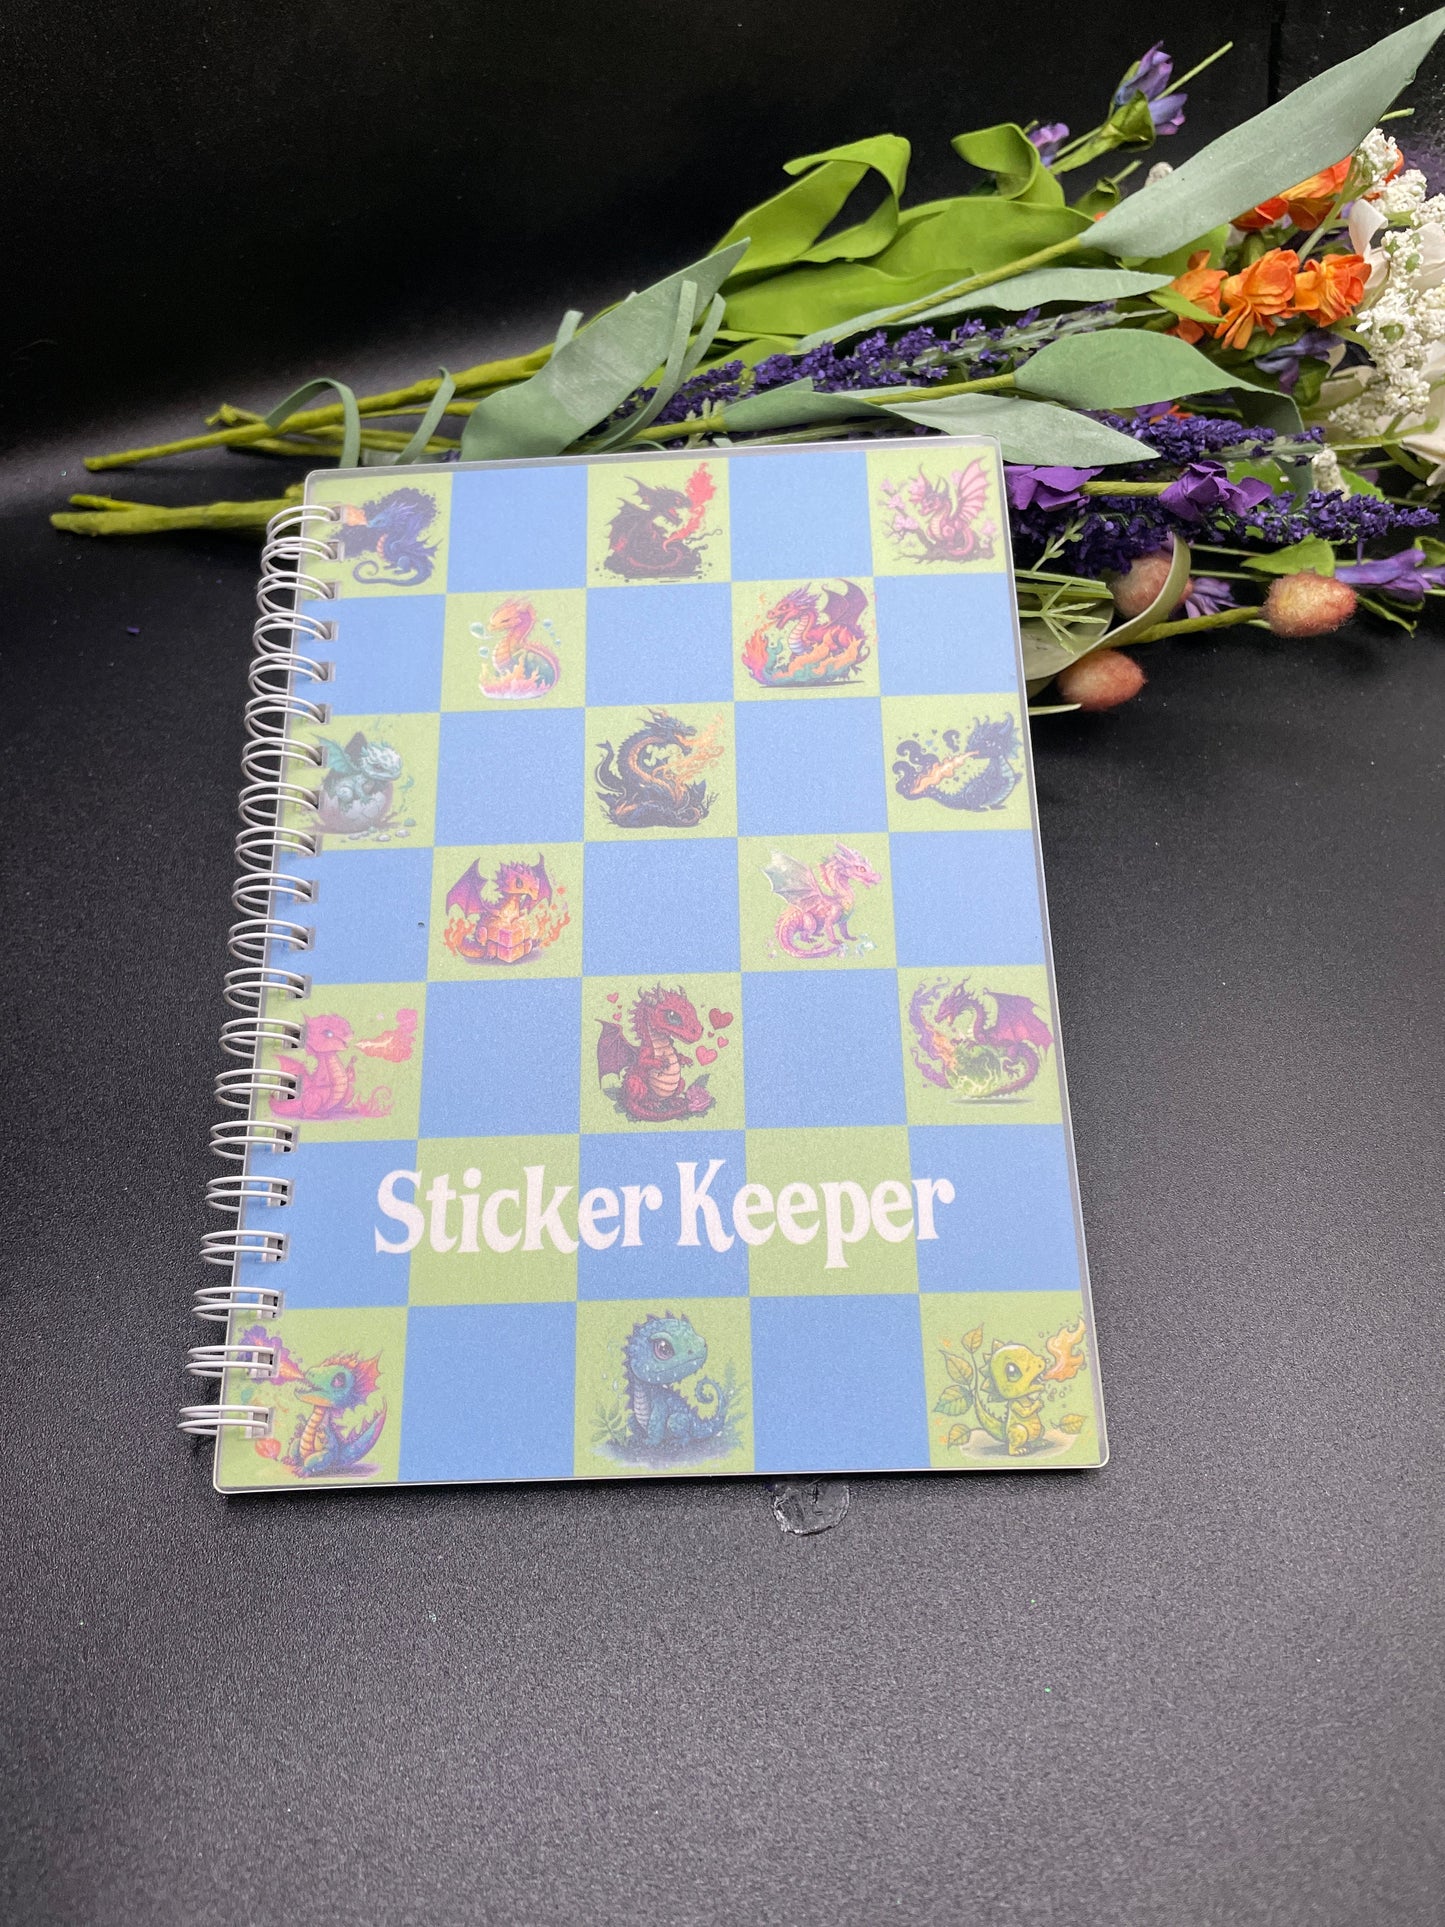 Reusable sticker book WITH 5 stickers - 5x7inch 20 page, sticker book, sticker keeper, sticker saver, reusable, stickers, sticker shop